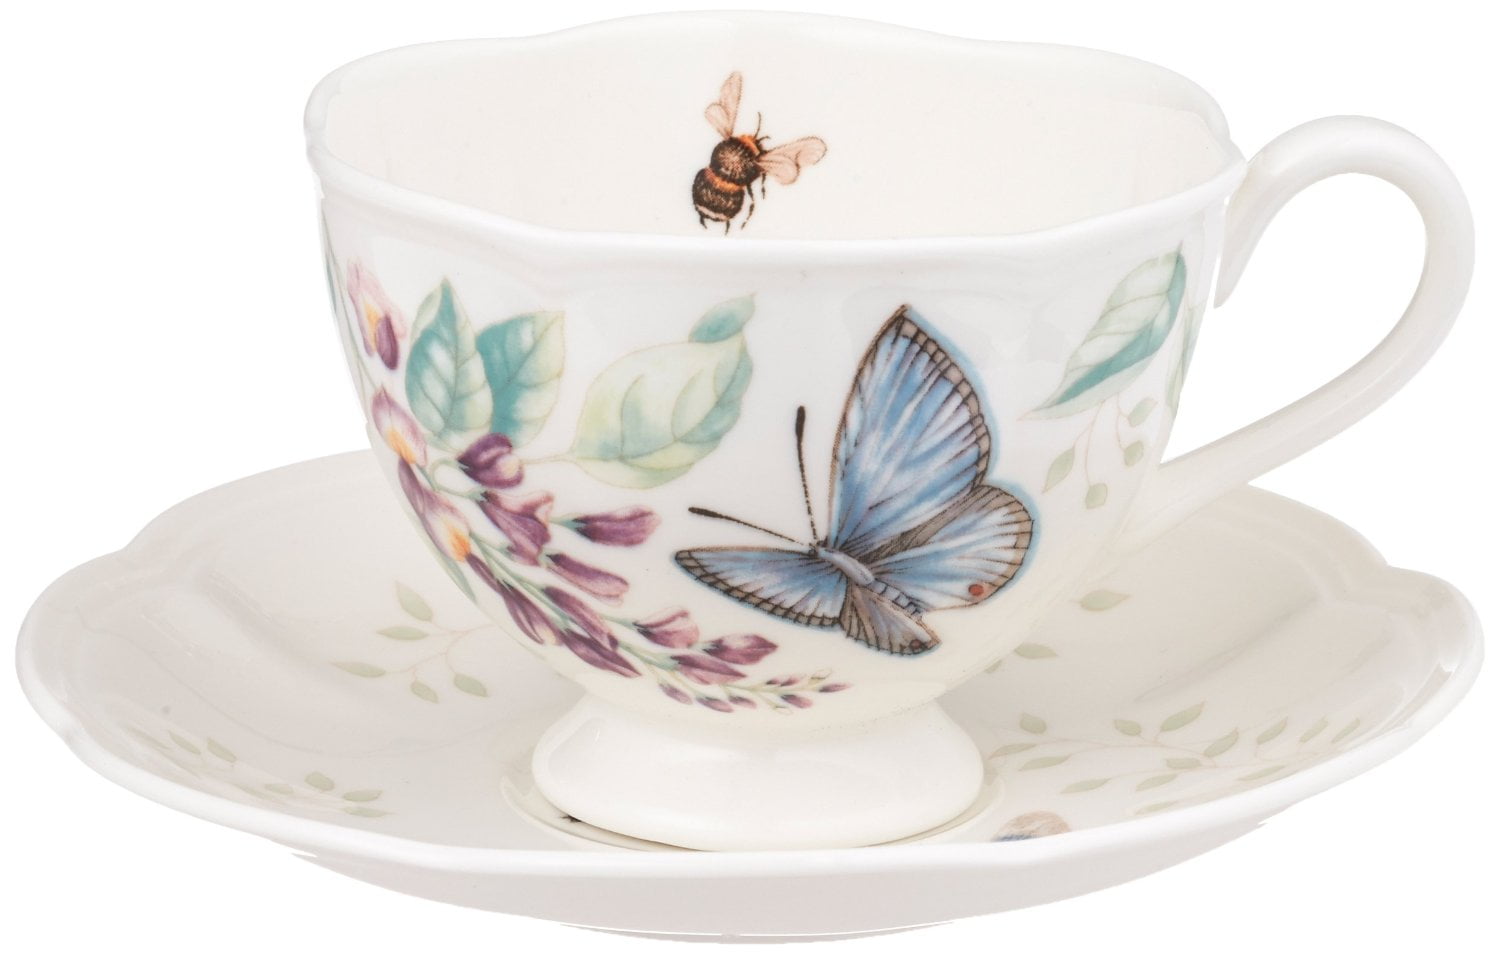 Lenox Butterfly Meadow Blue Butterfly Cup and Saucer Set